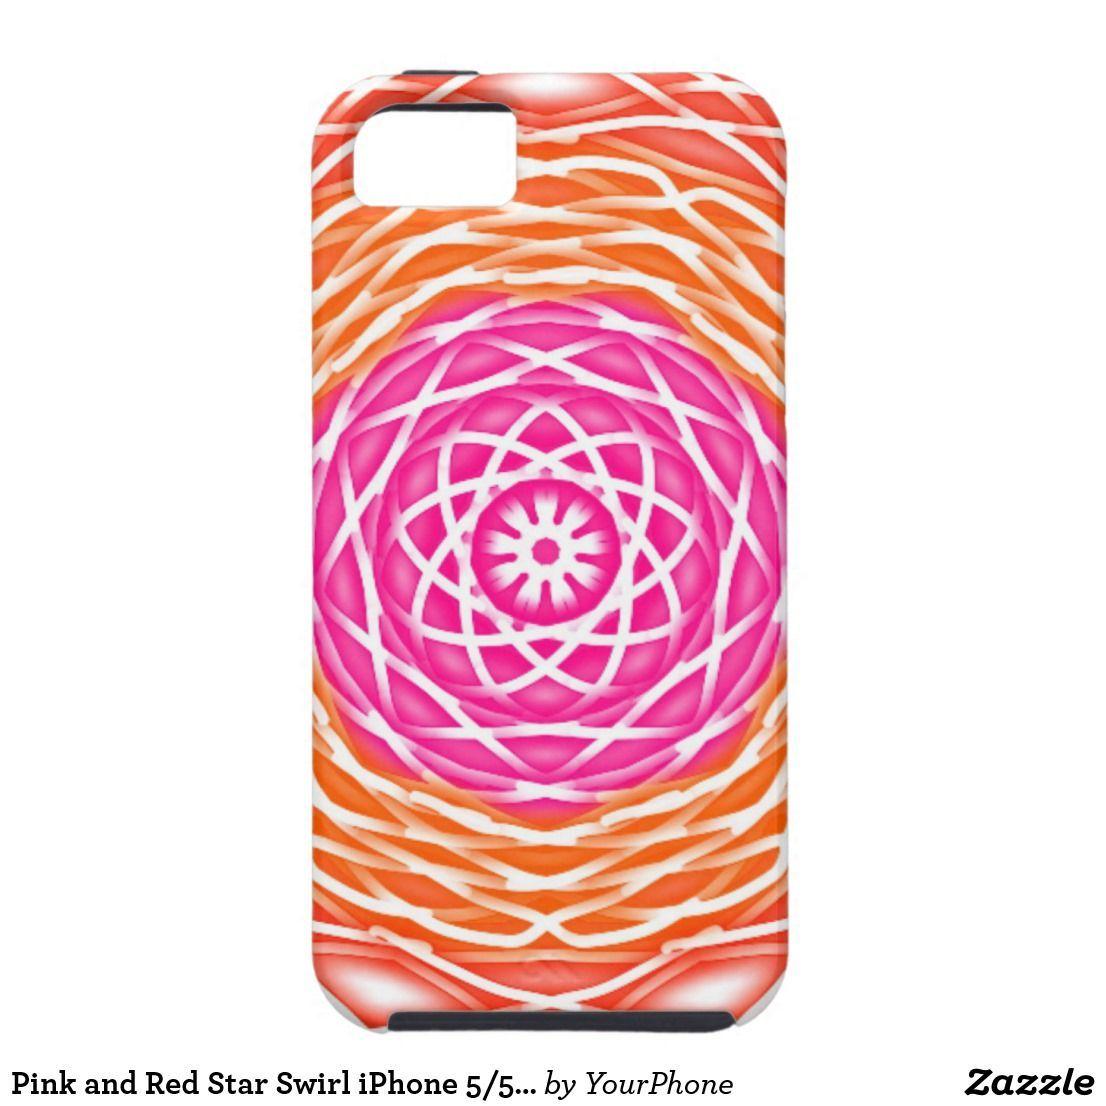 Red Star Swirl Logo - Pink and Red Star Swirl iPhone 5/5s Case